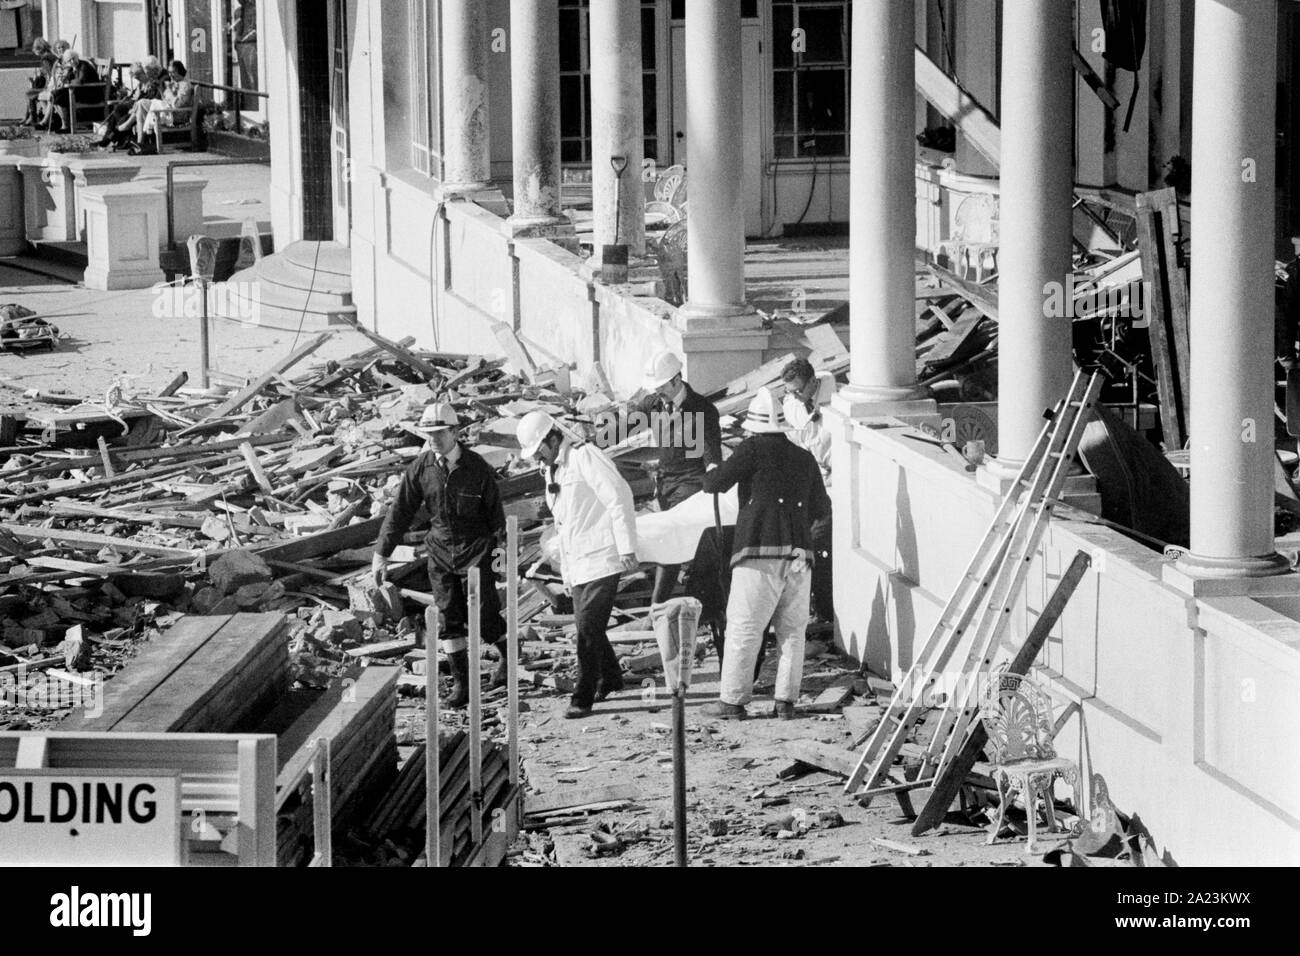 A casualty is removed from The Grand Hotel, Brighton, E. Sussex, England after the bombing by the IRA. 12th October 1984. Stock Photo